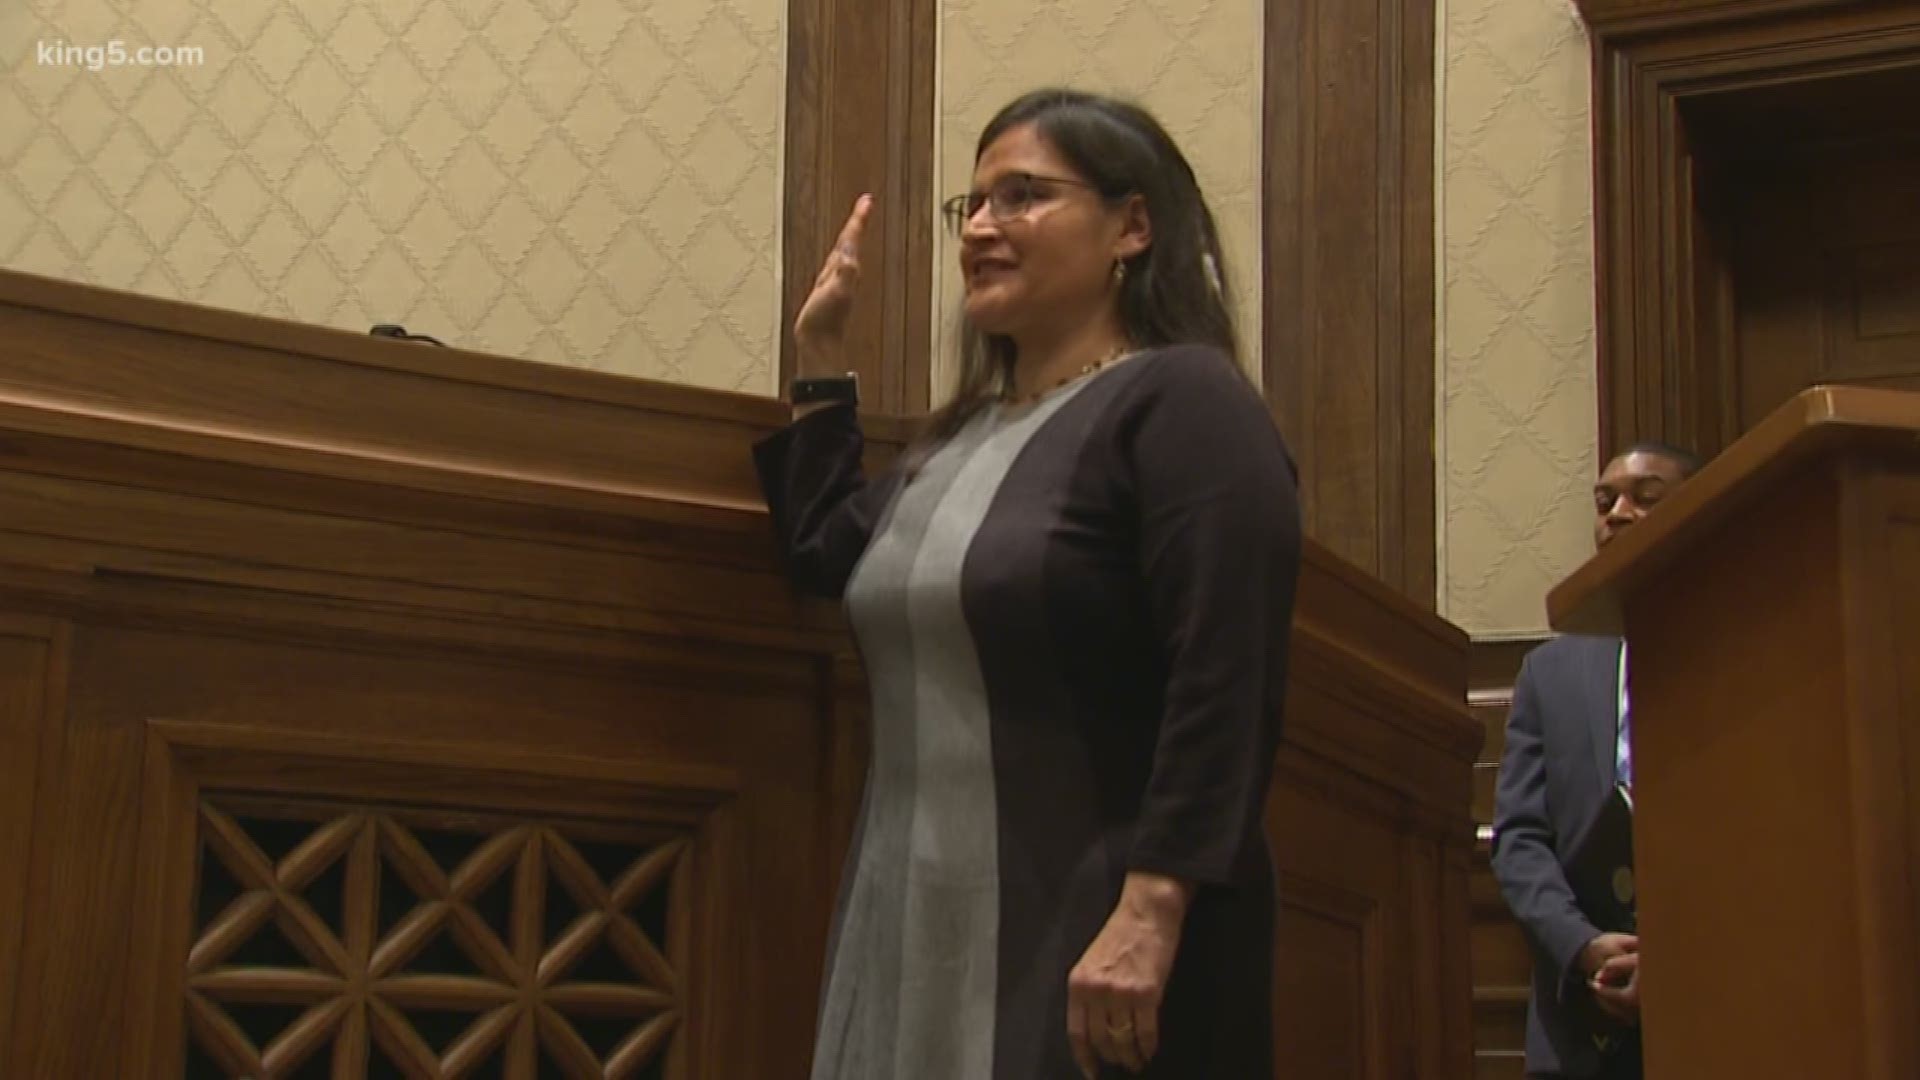 Governor Jay Inslee says he appointed her because of her record but the judge tells Drew Mikkelsen she's not hiding her heritage.